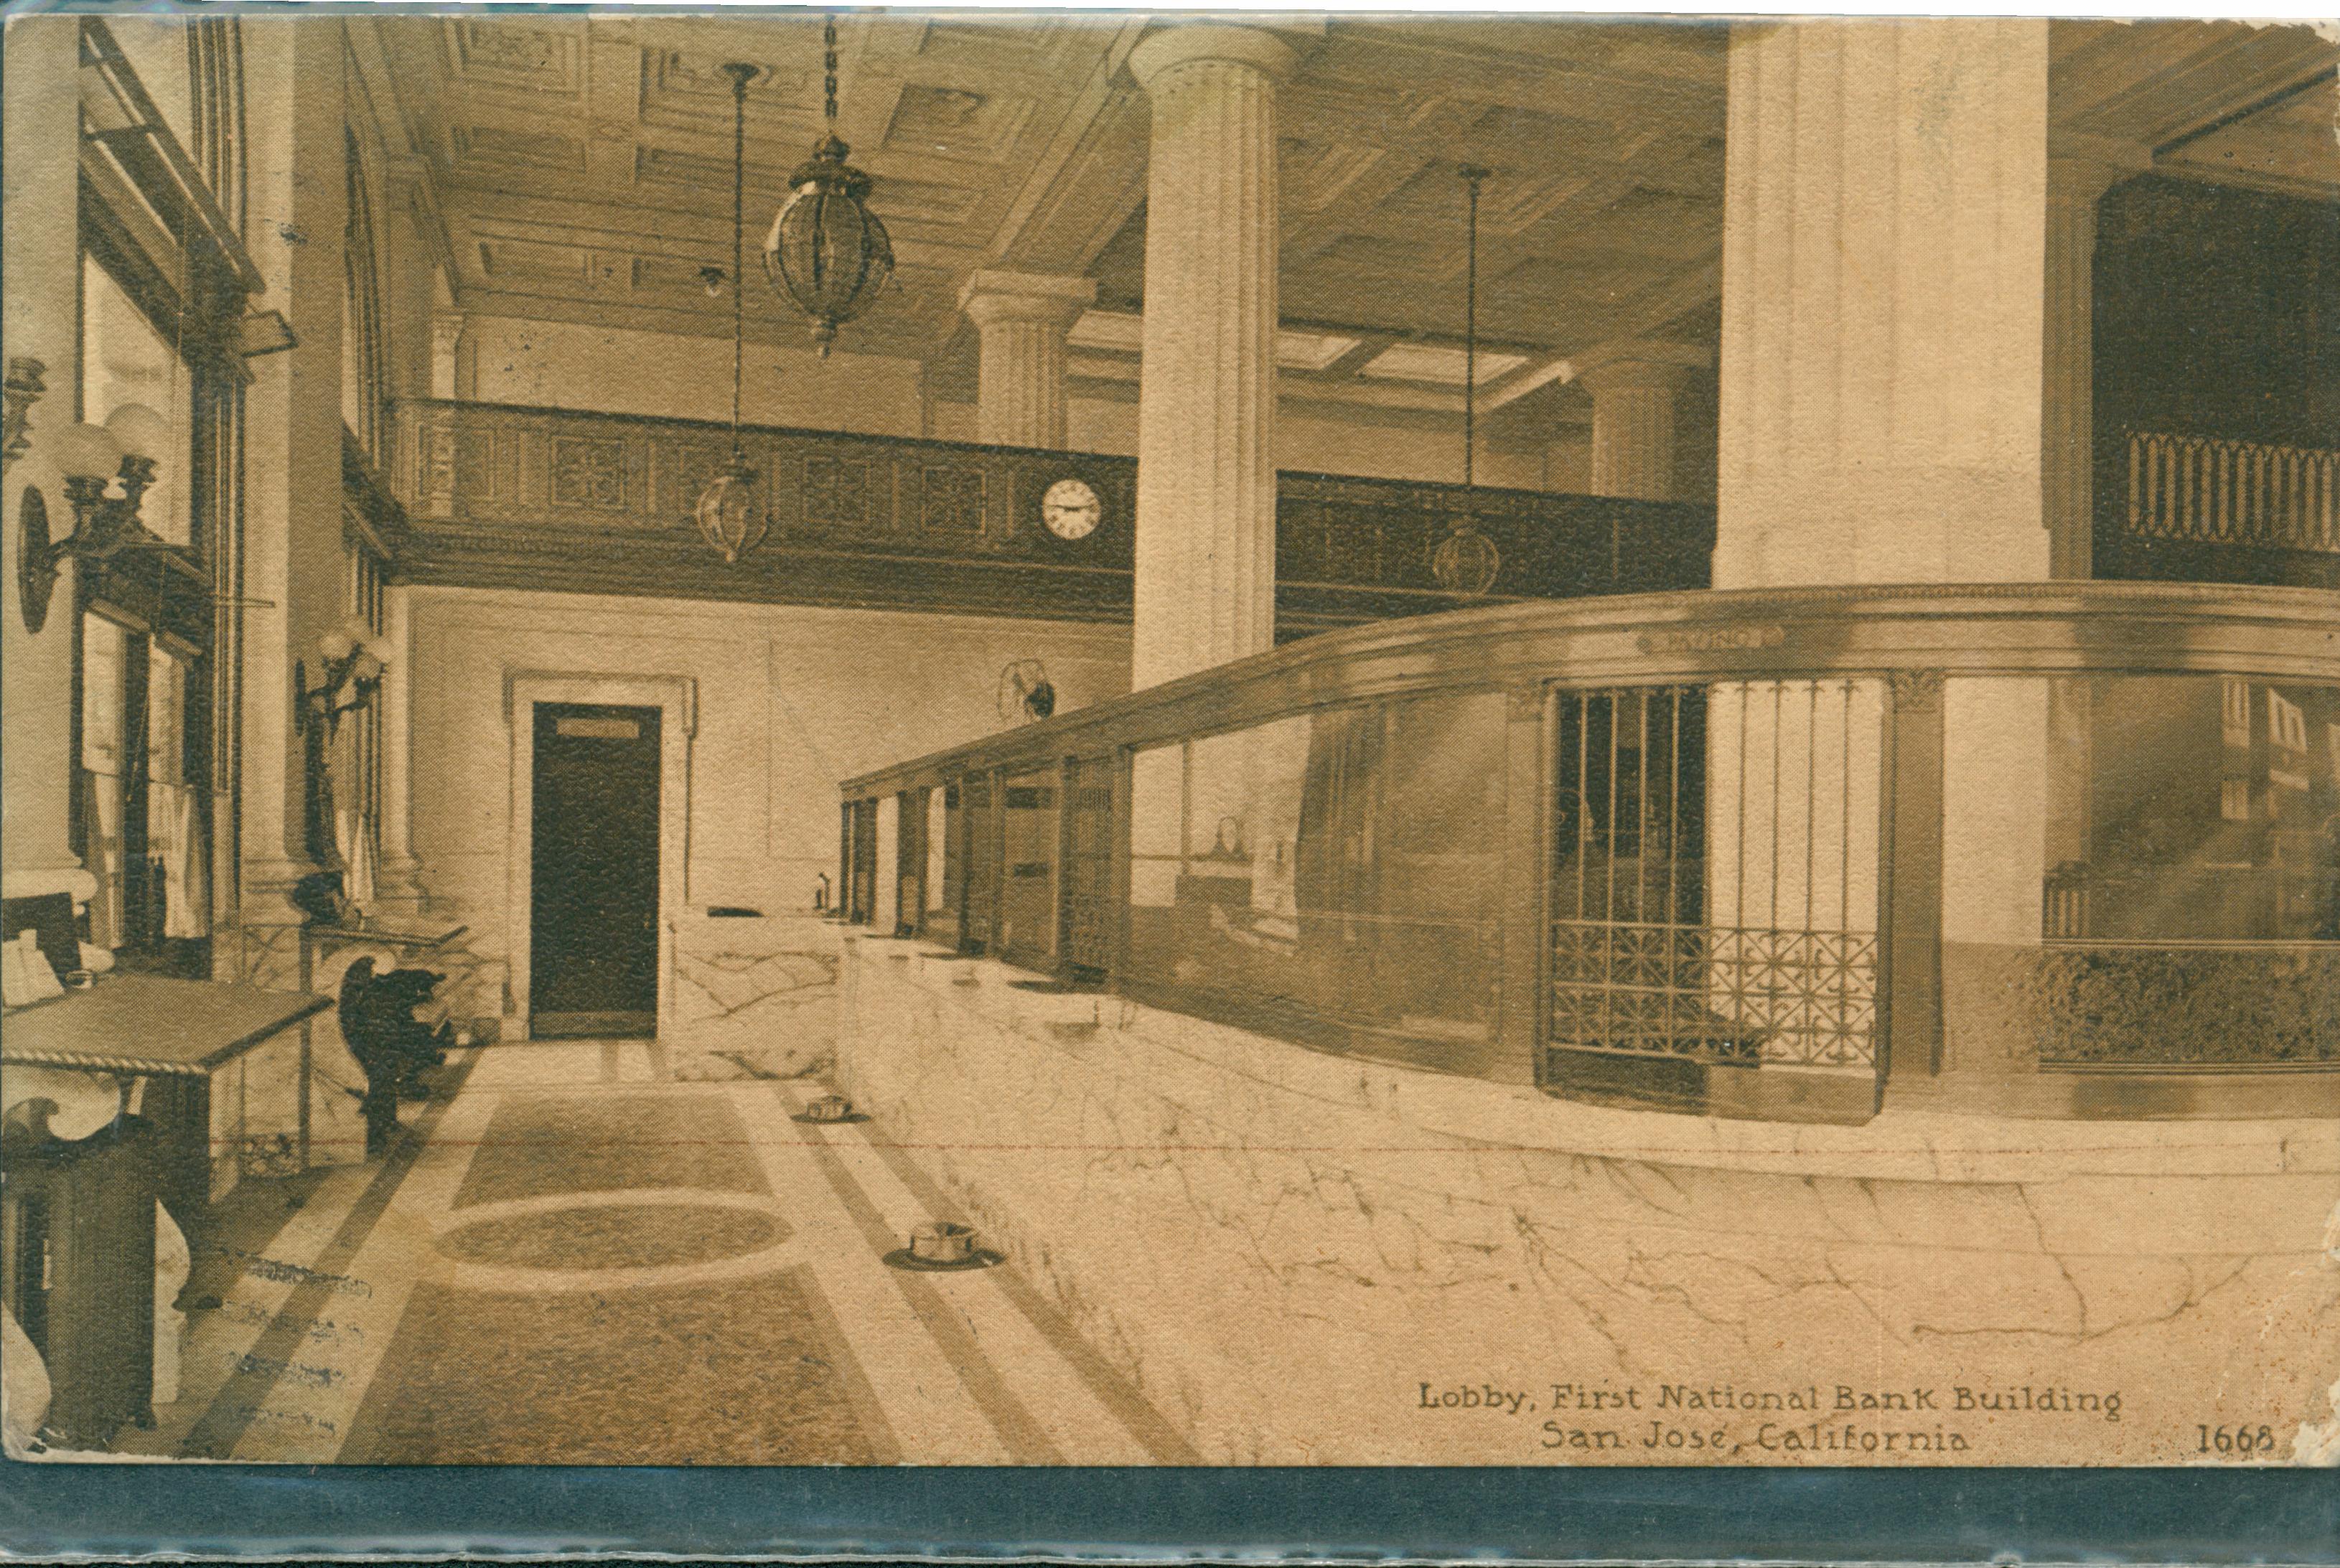 Lobby view of the First National Bank Building, San Jose California